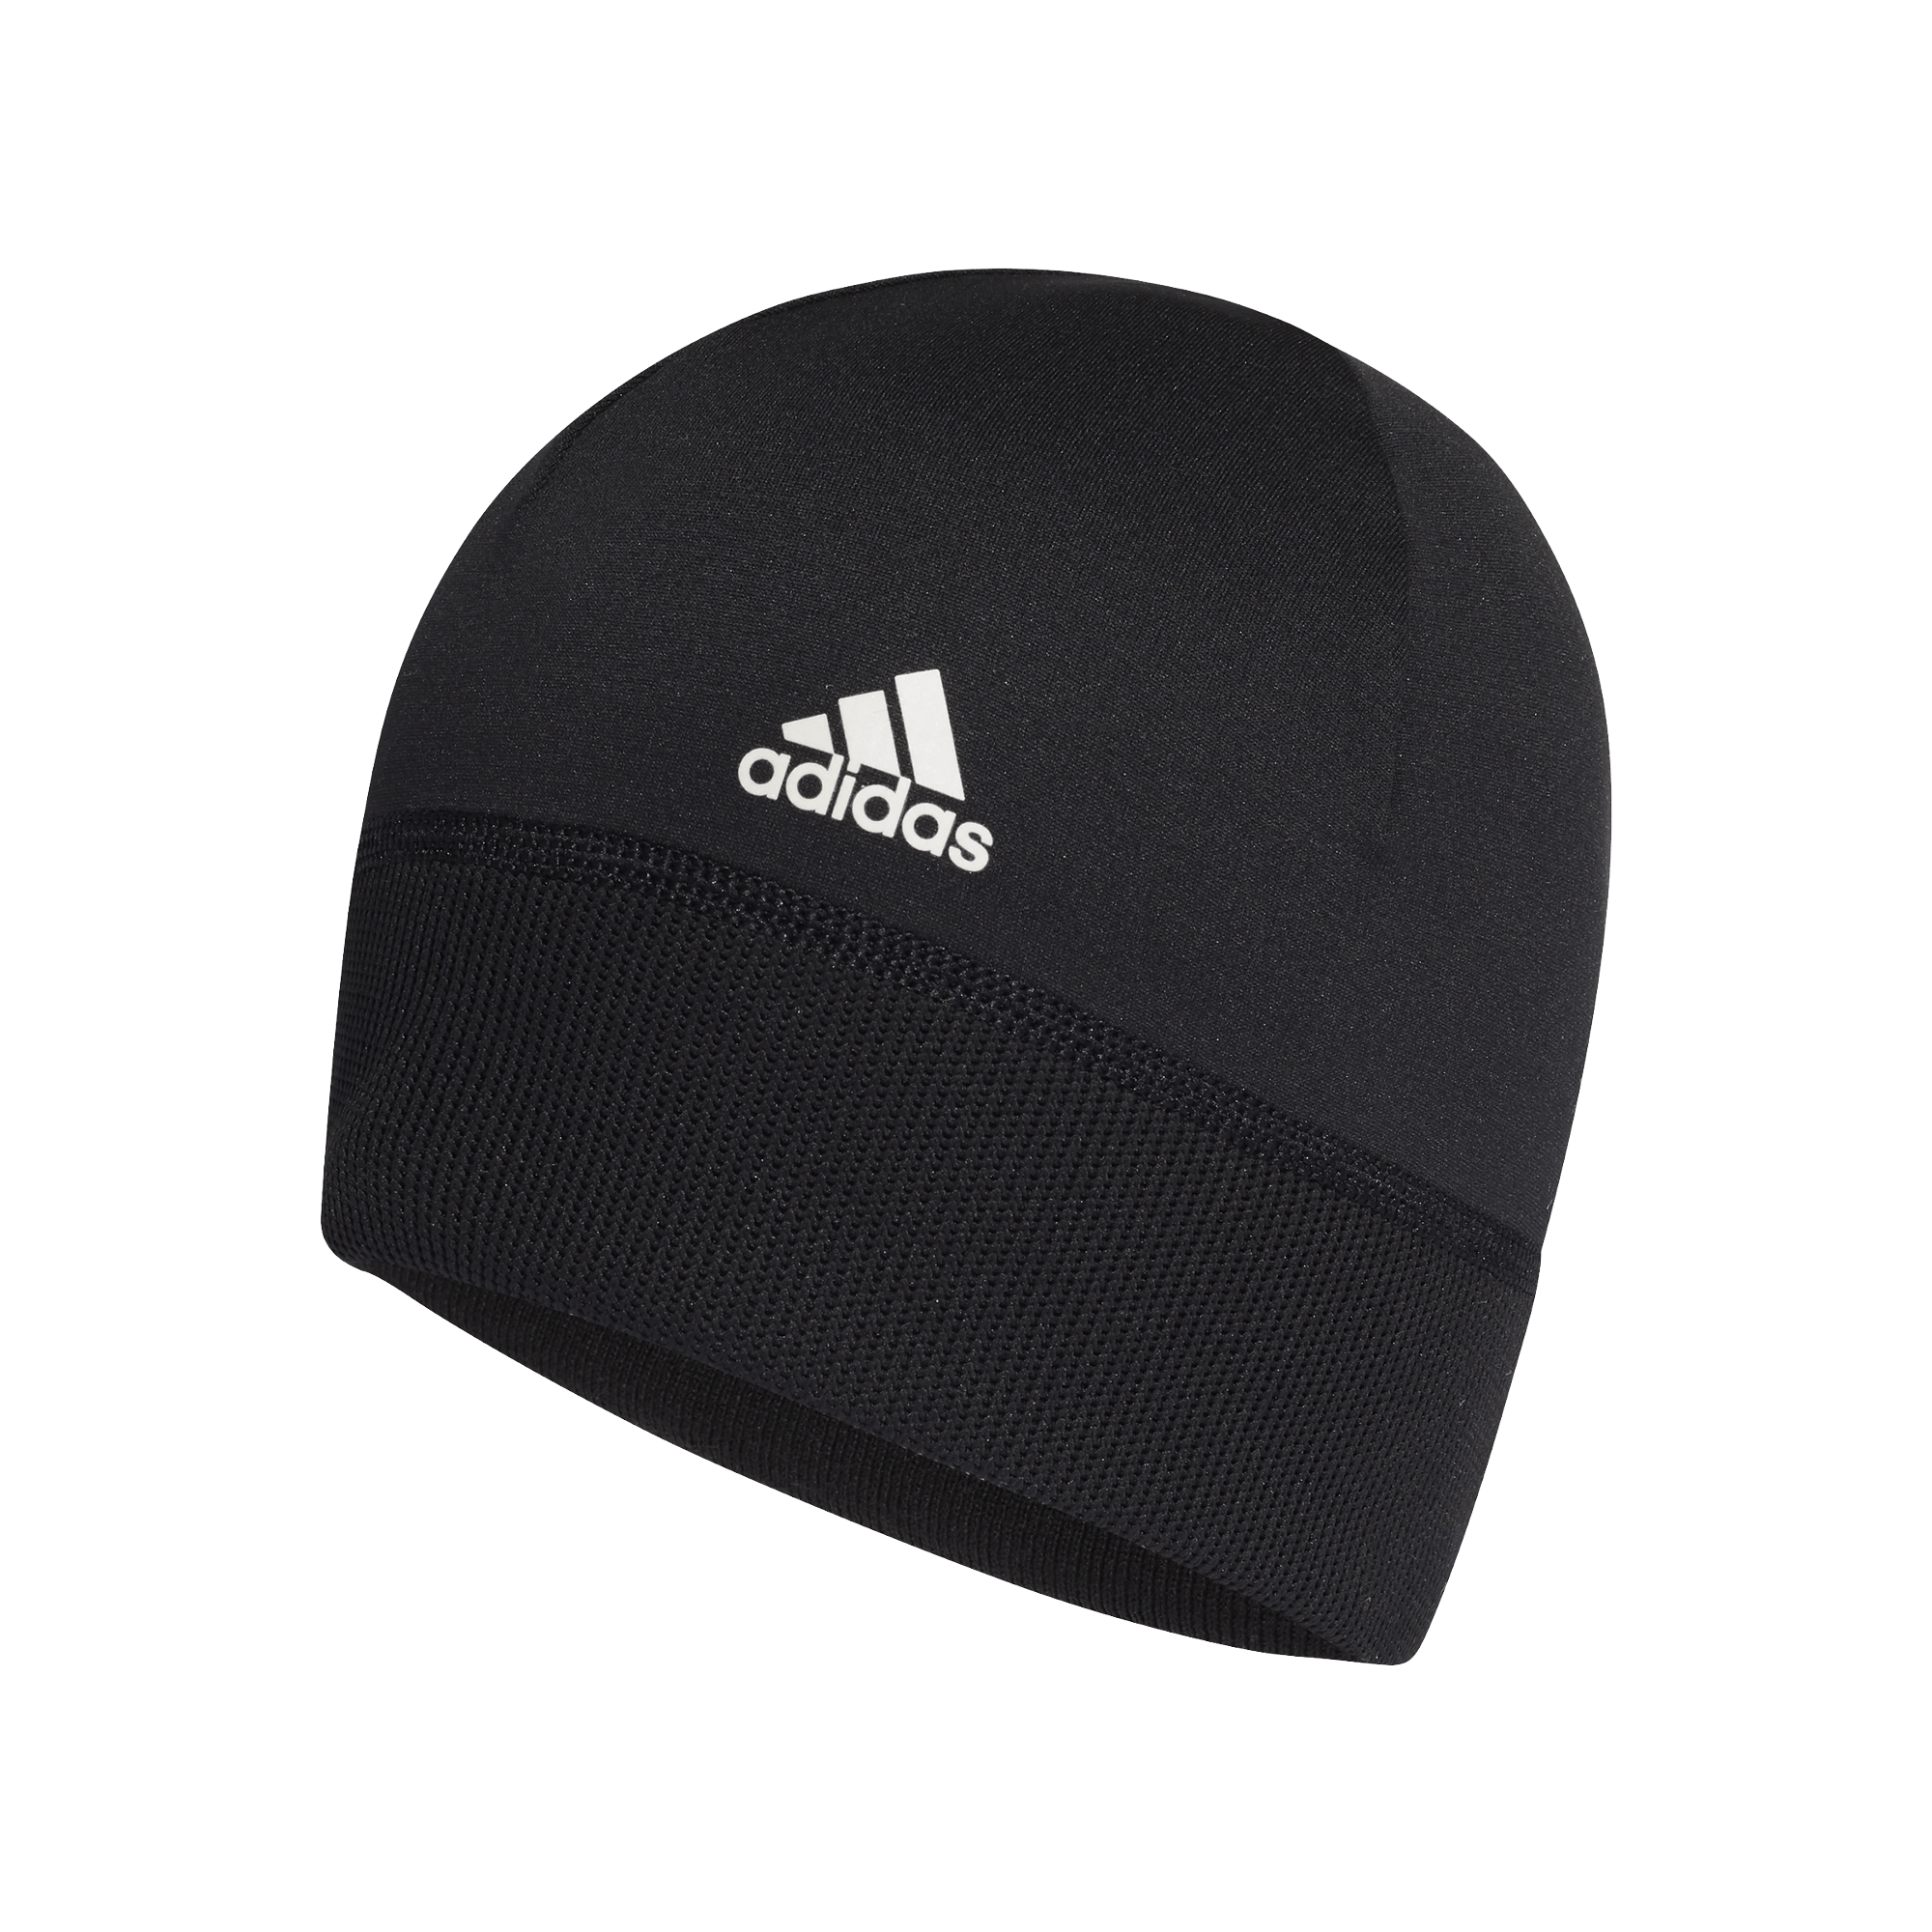 All Blacks Rugby Beanie | Beanie Shop - World Wicking Polyester Rugby Adidas by Moisture 2021 Rugby New Zealand